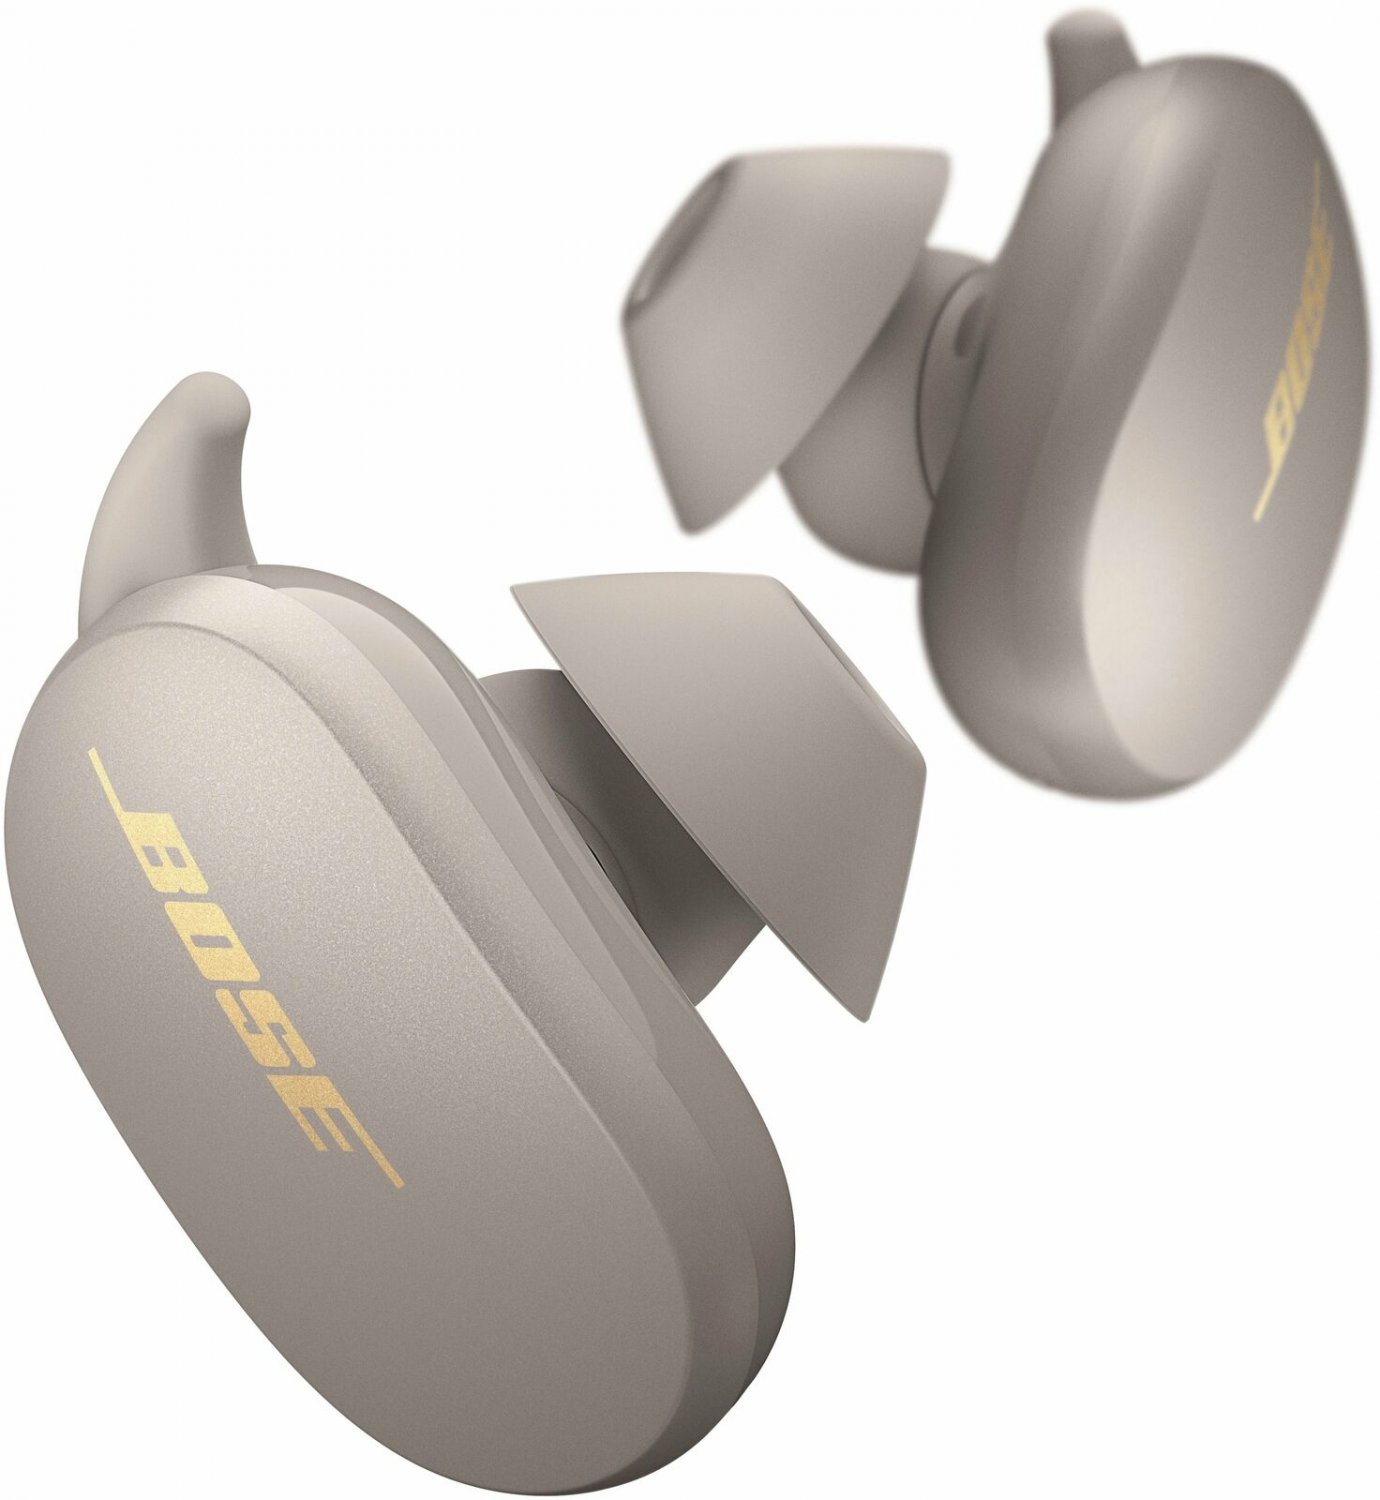 Bose - QuietComfort Earbuds True Wireless Noise Cancelling In-Ear Headphones with Charging Case